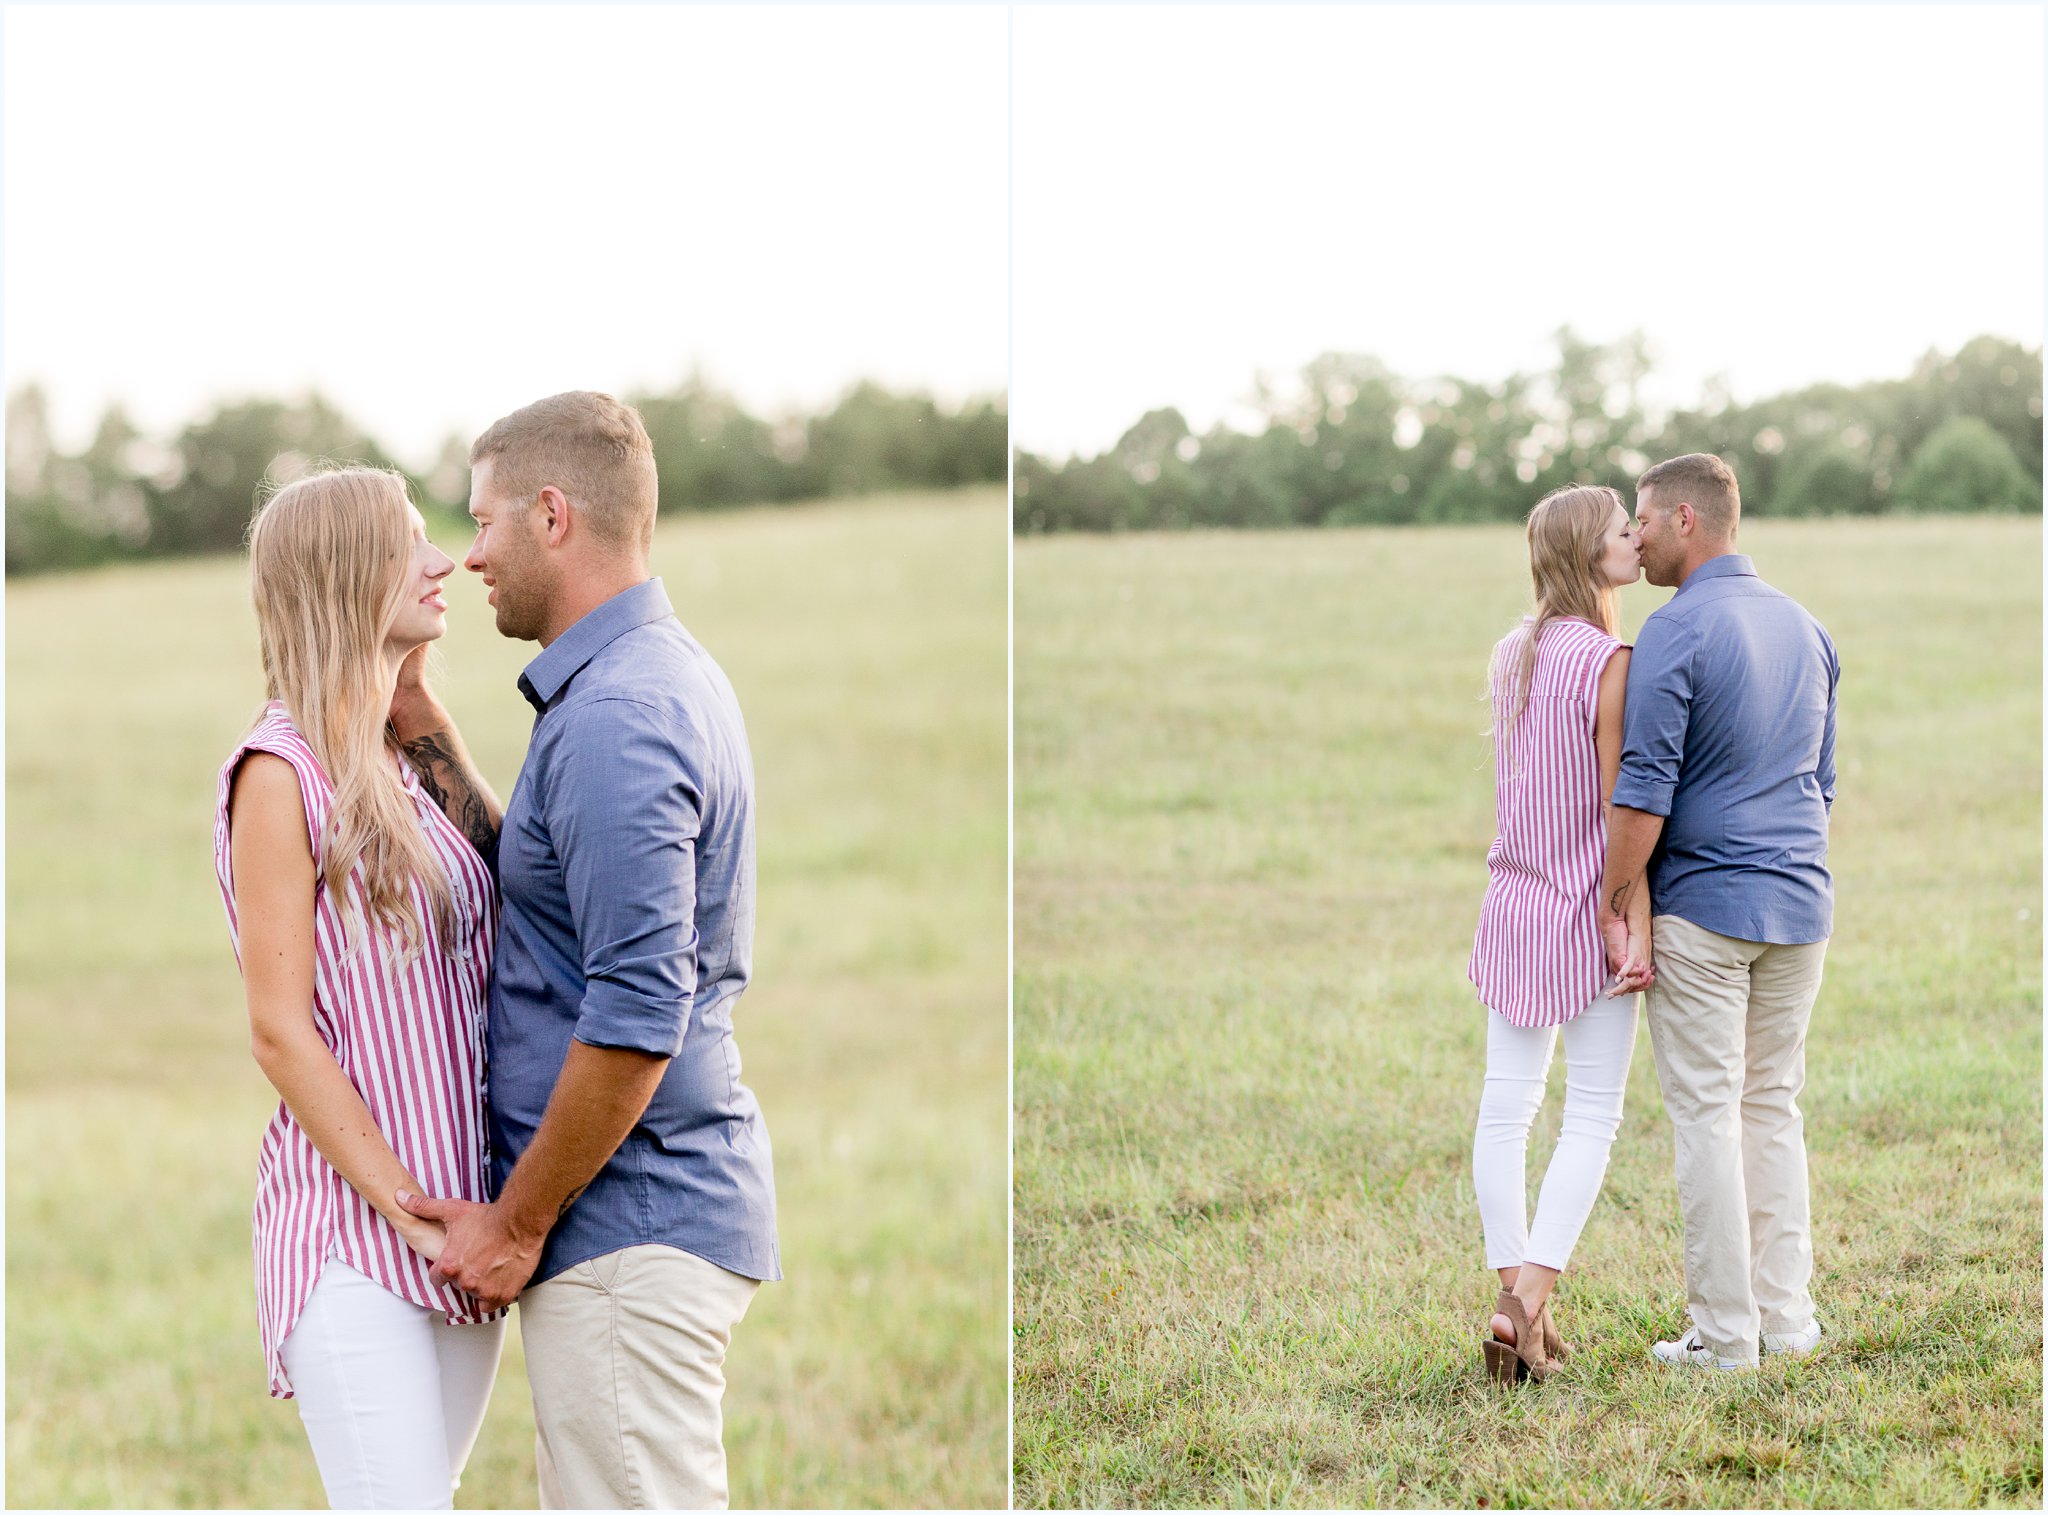 Country engagement session at Sorella Farms